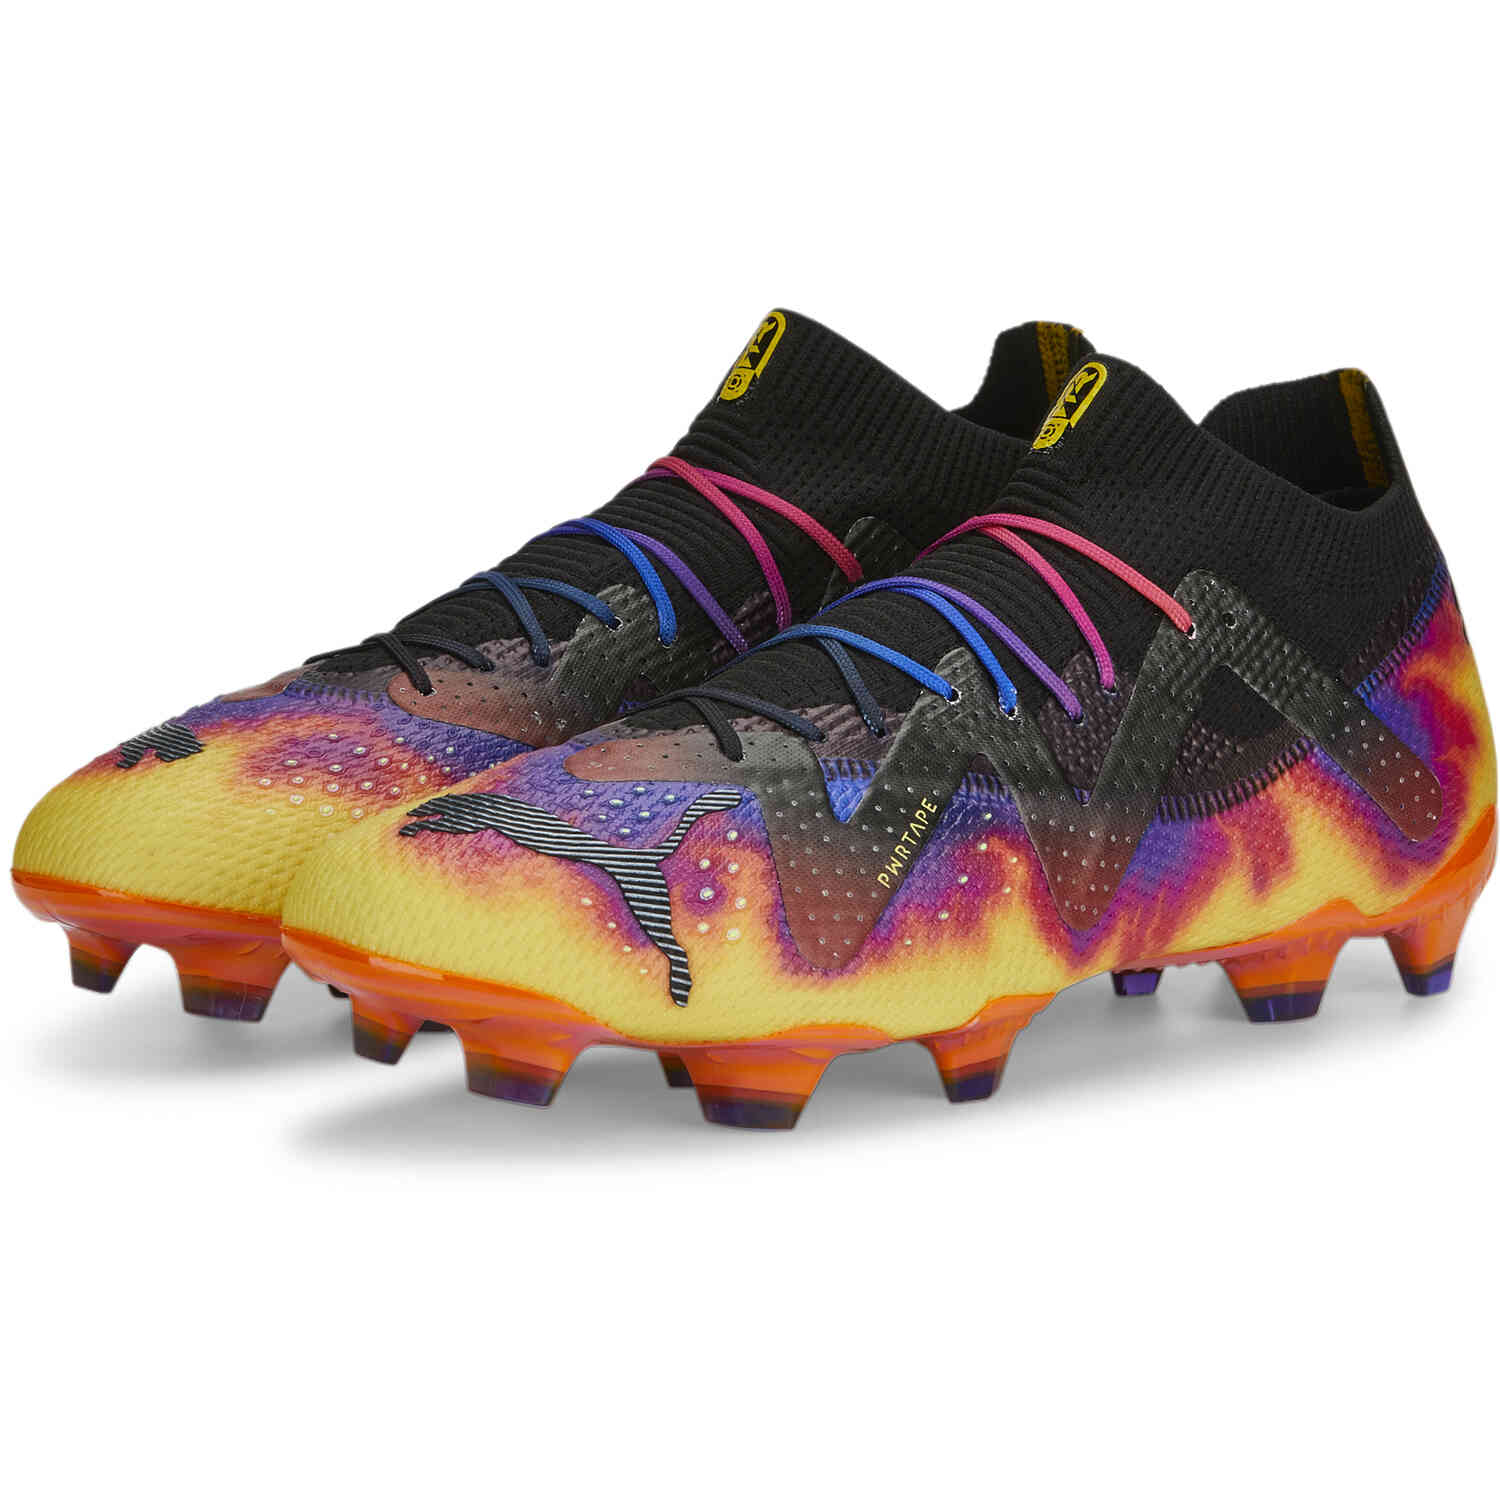 PUMA Elements Future Ultimate - Team Violet & with Yellow Sizzle with Ricki - SoccerPro